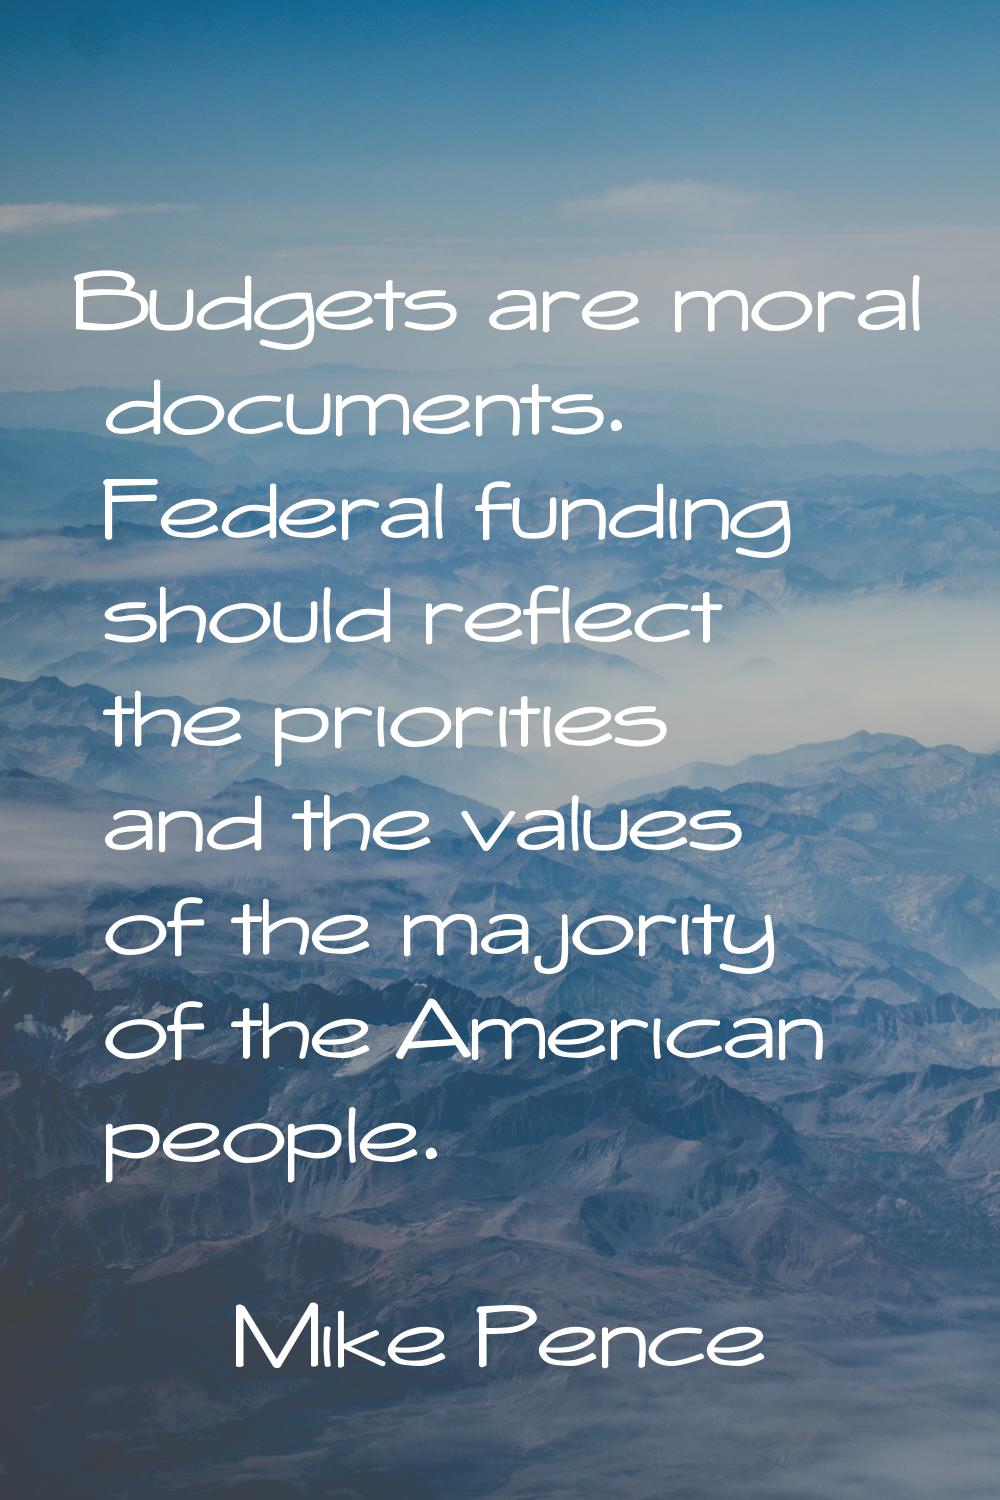 Budgets are moral documents. Federal funding should reflect the priorities and the values of the ma